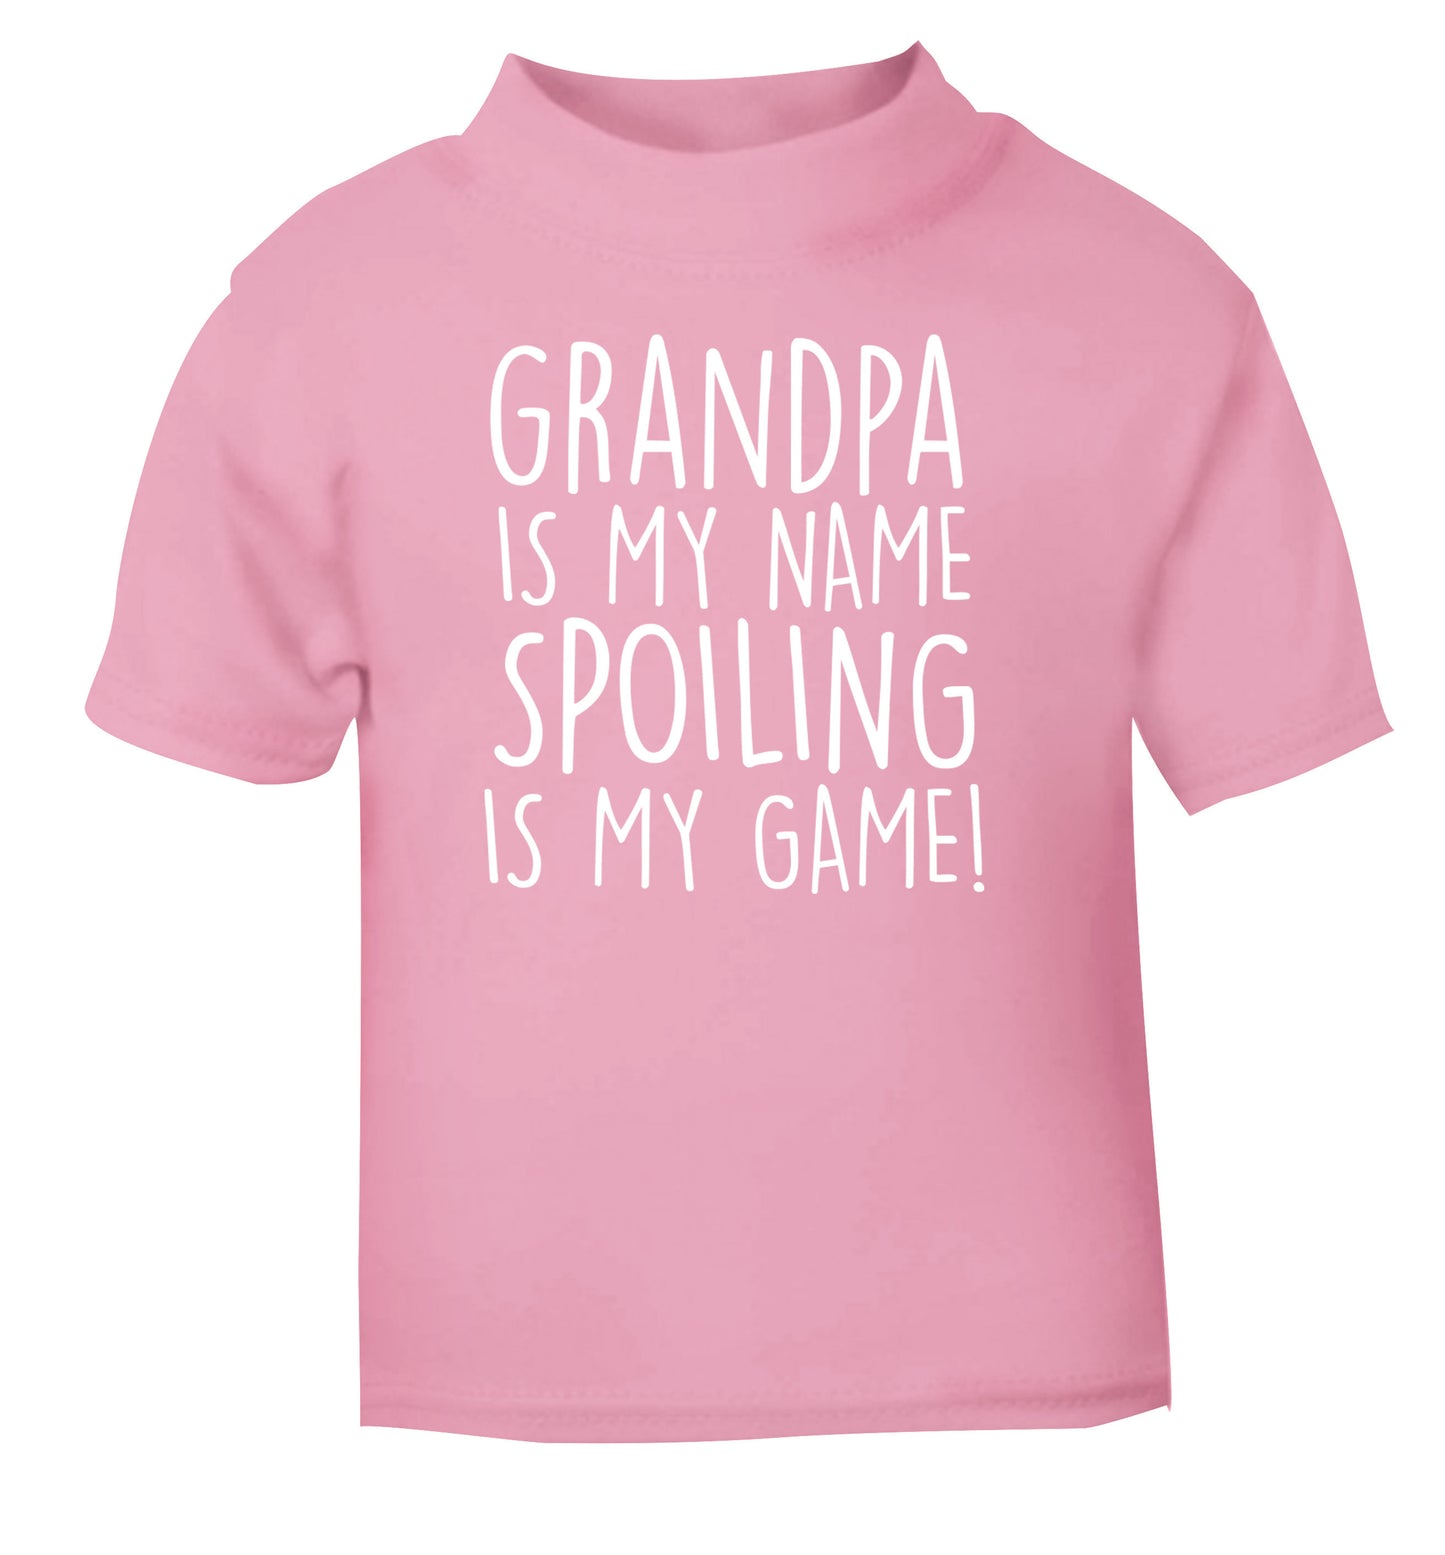 Grandpa is my name, spoiling is my game light pink Baby Toddler Tshirt 2 Years